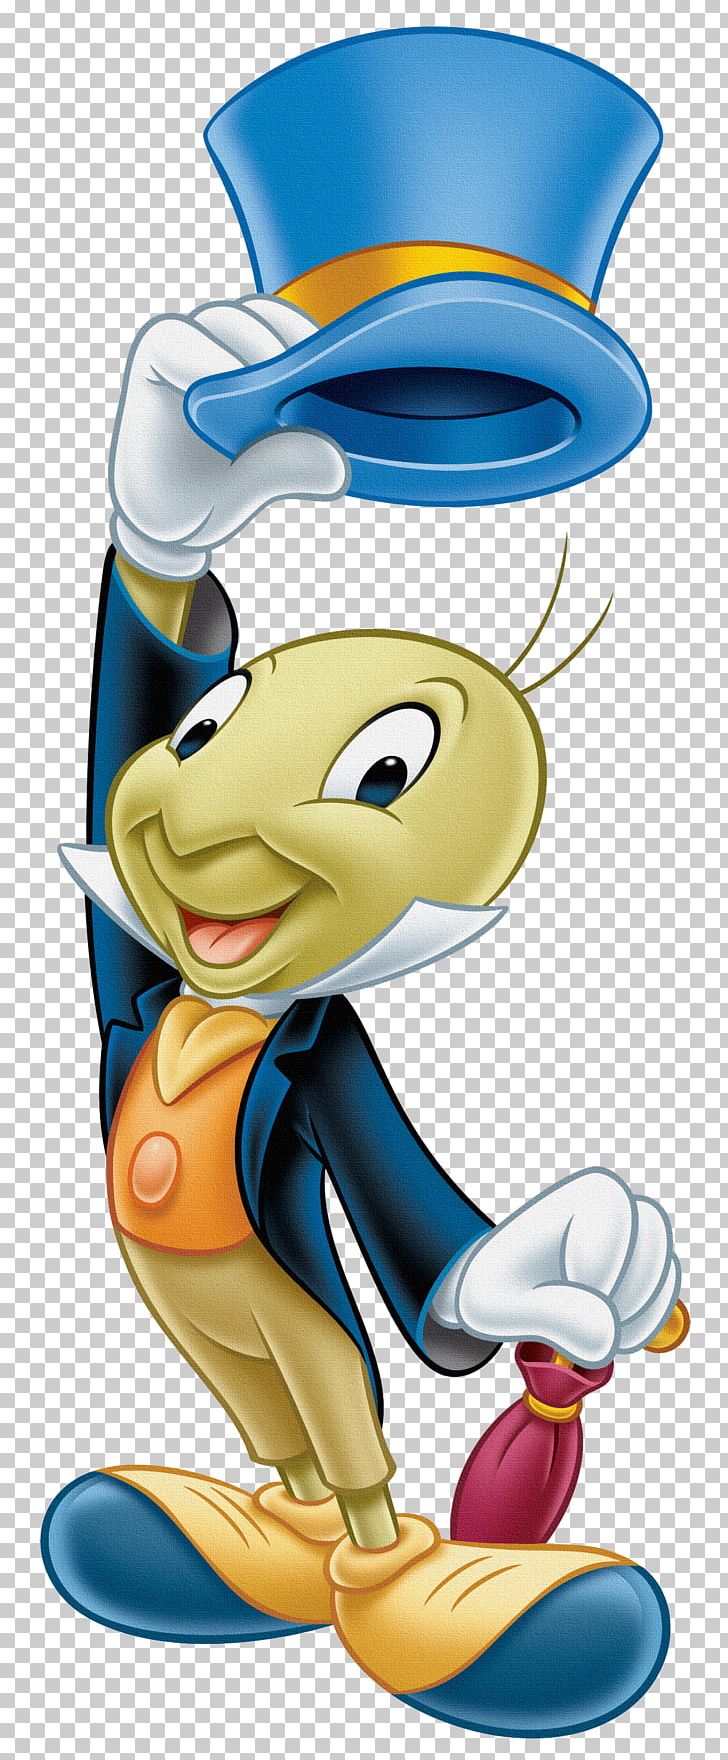 Jiminy Cricket Pinocchio The Talking Crickett The Fairy With Turquoise Hair Figaro PNG, Clipart, Animation, Boy, Cartoon, Cartoons, Character Free PNG Download